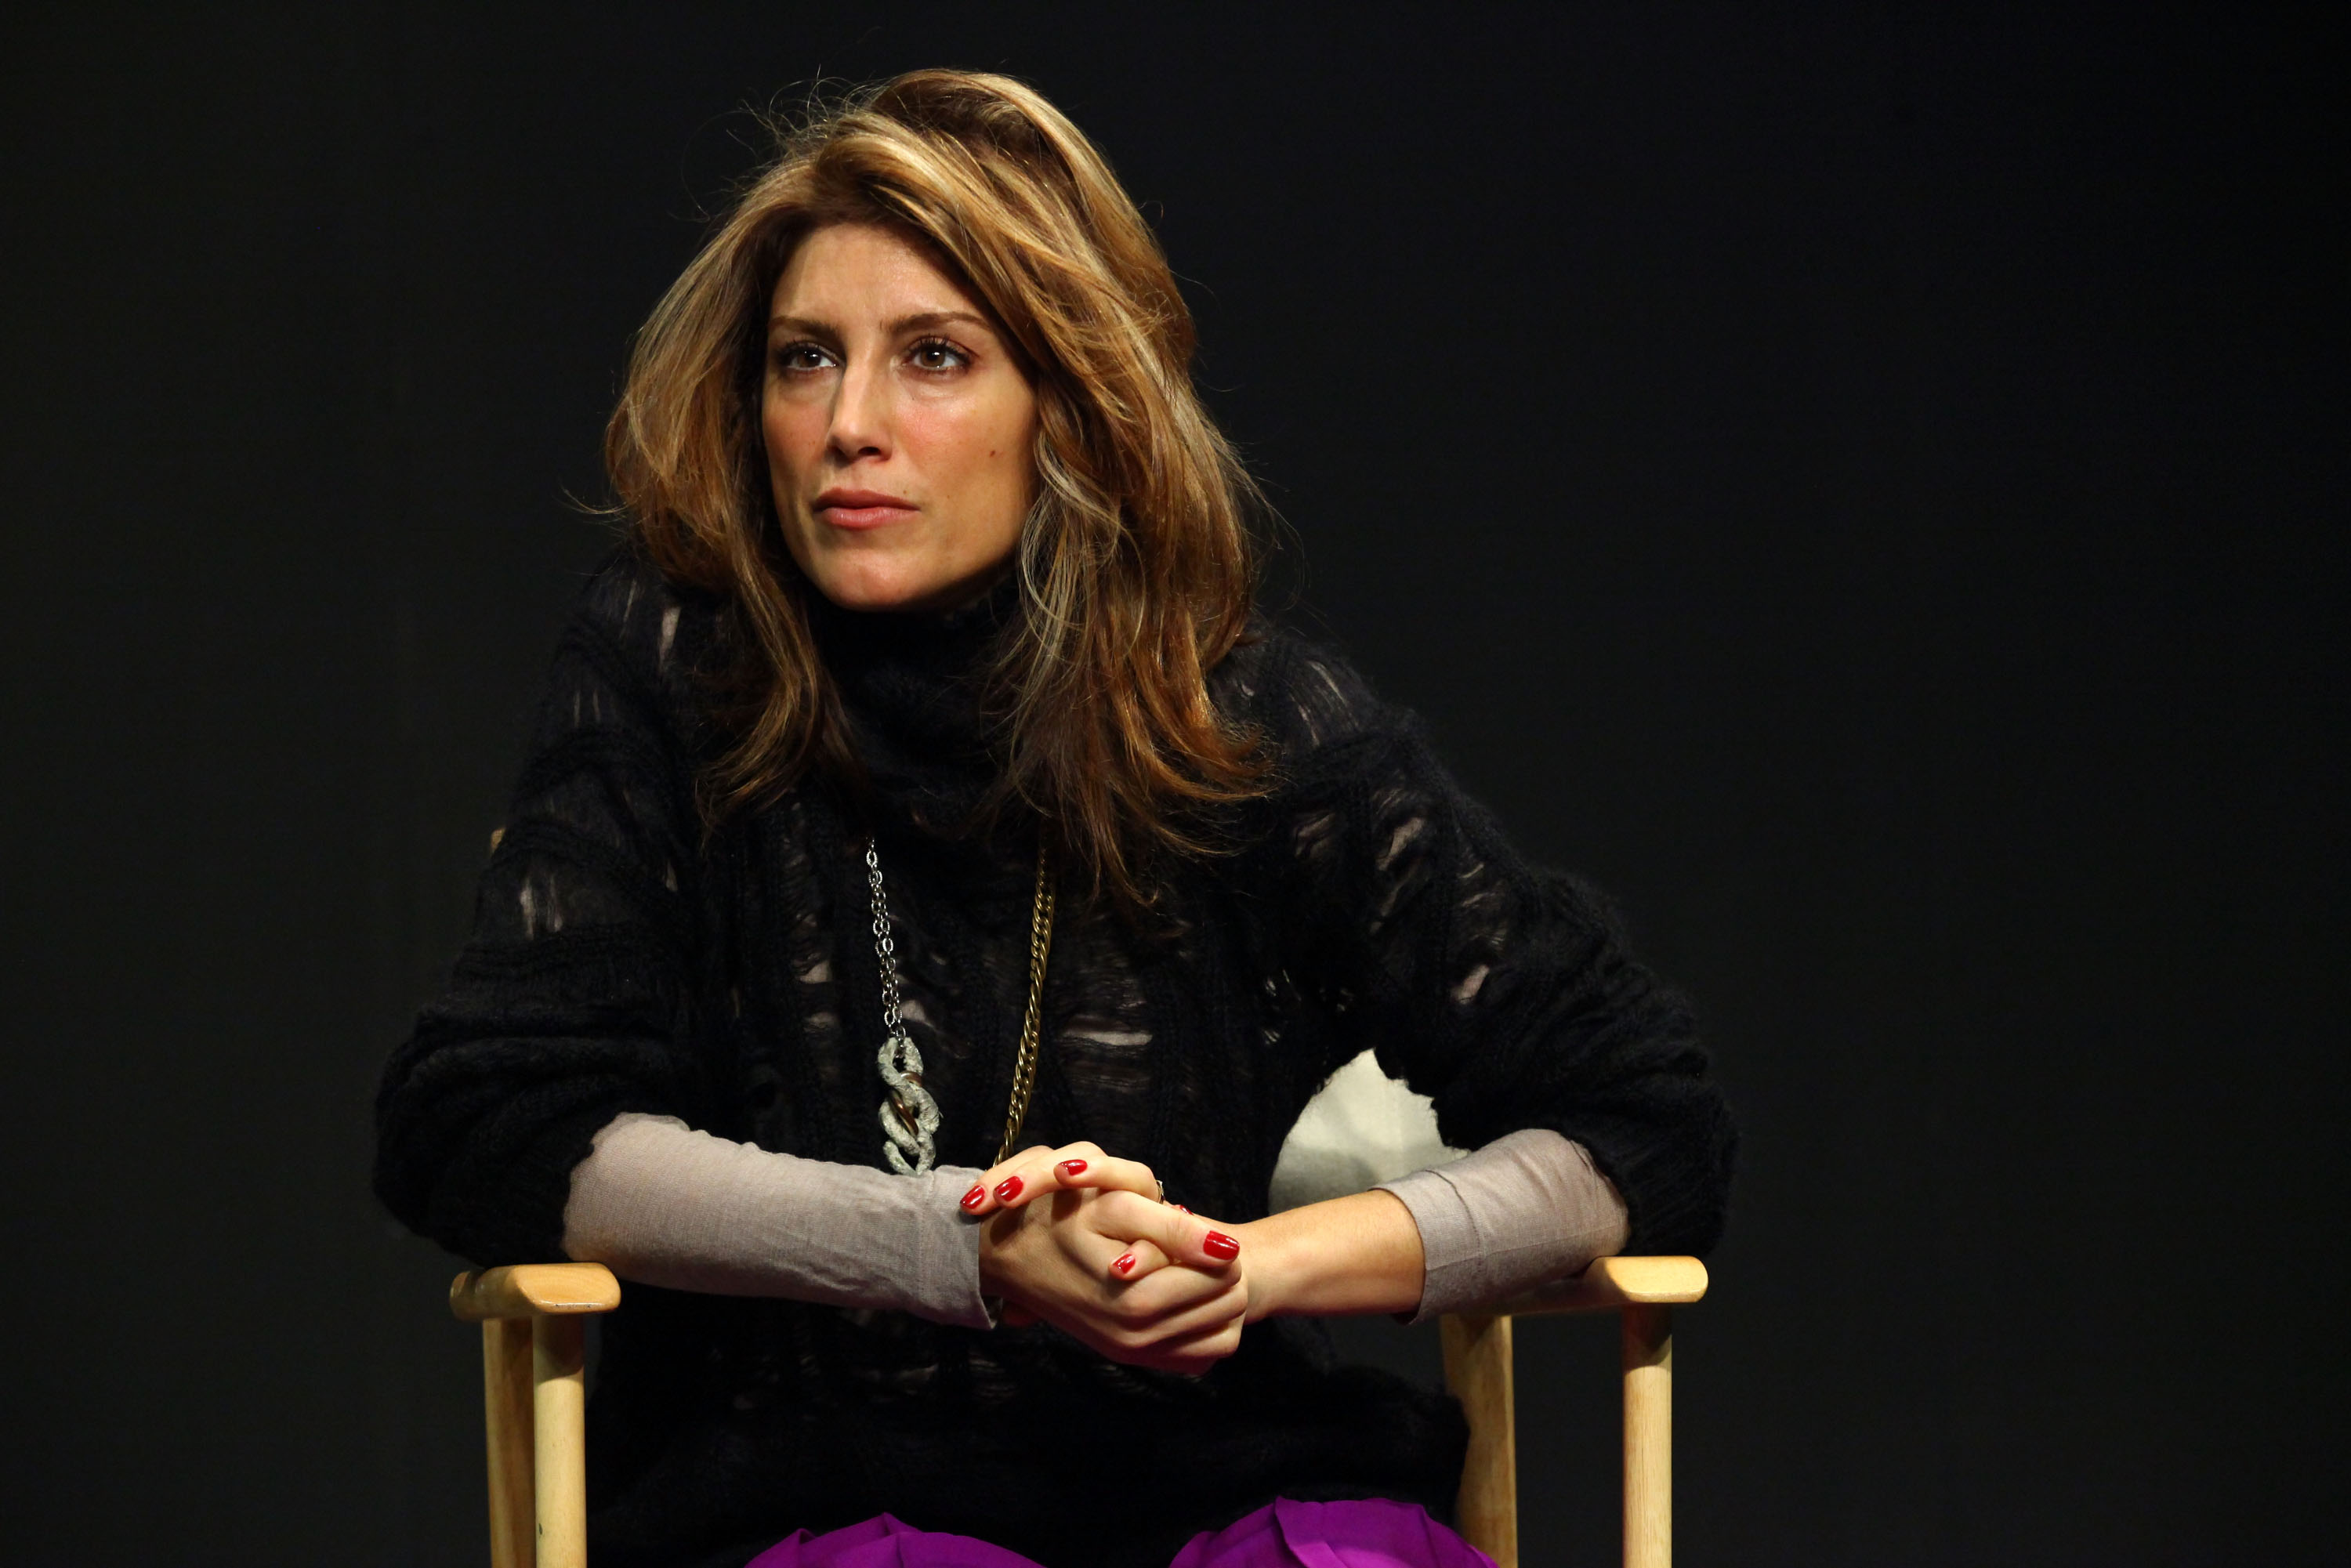 Jennifer Esposito returns to The Lee Strasberg Theatre & Film Institute New York to teach a one-day acting class on December 10, 2009, in New York City. | Source: Getty Images